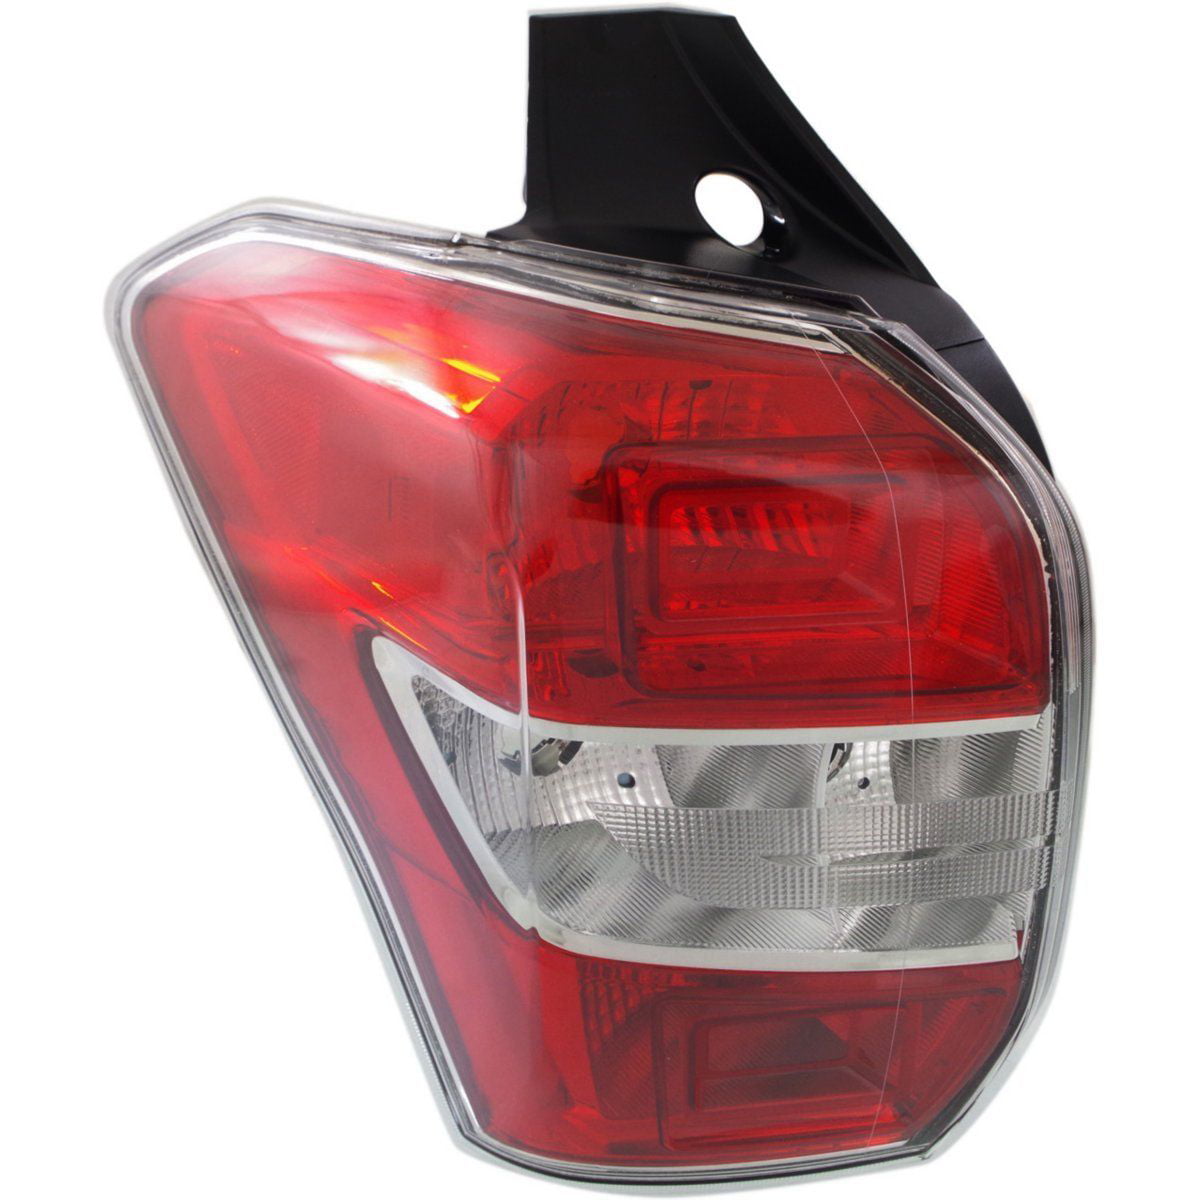 NEW TAIL LIGHT LENS AND HOUSING LEFT FITS 20142016 SUBARU